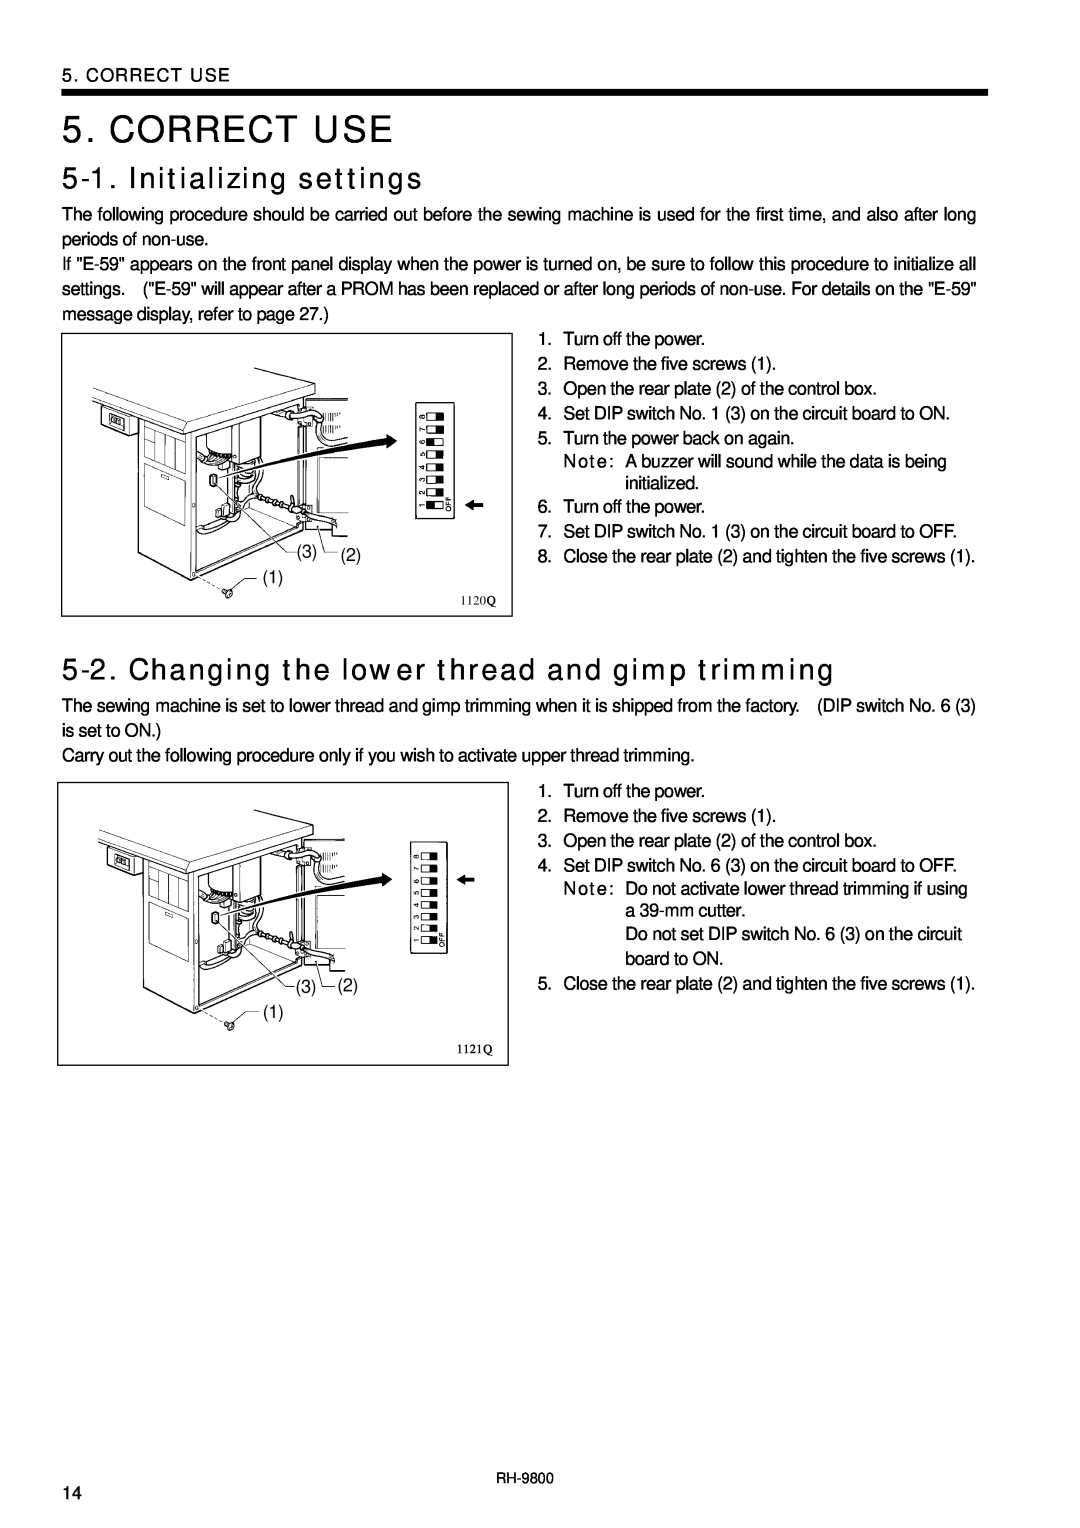 Brother DH4-B980 instruction manual Correct Use, Initializing settings, Changing the lower thread and gimp trimming 